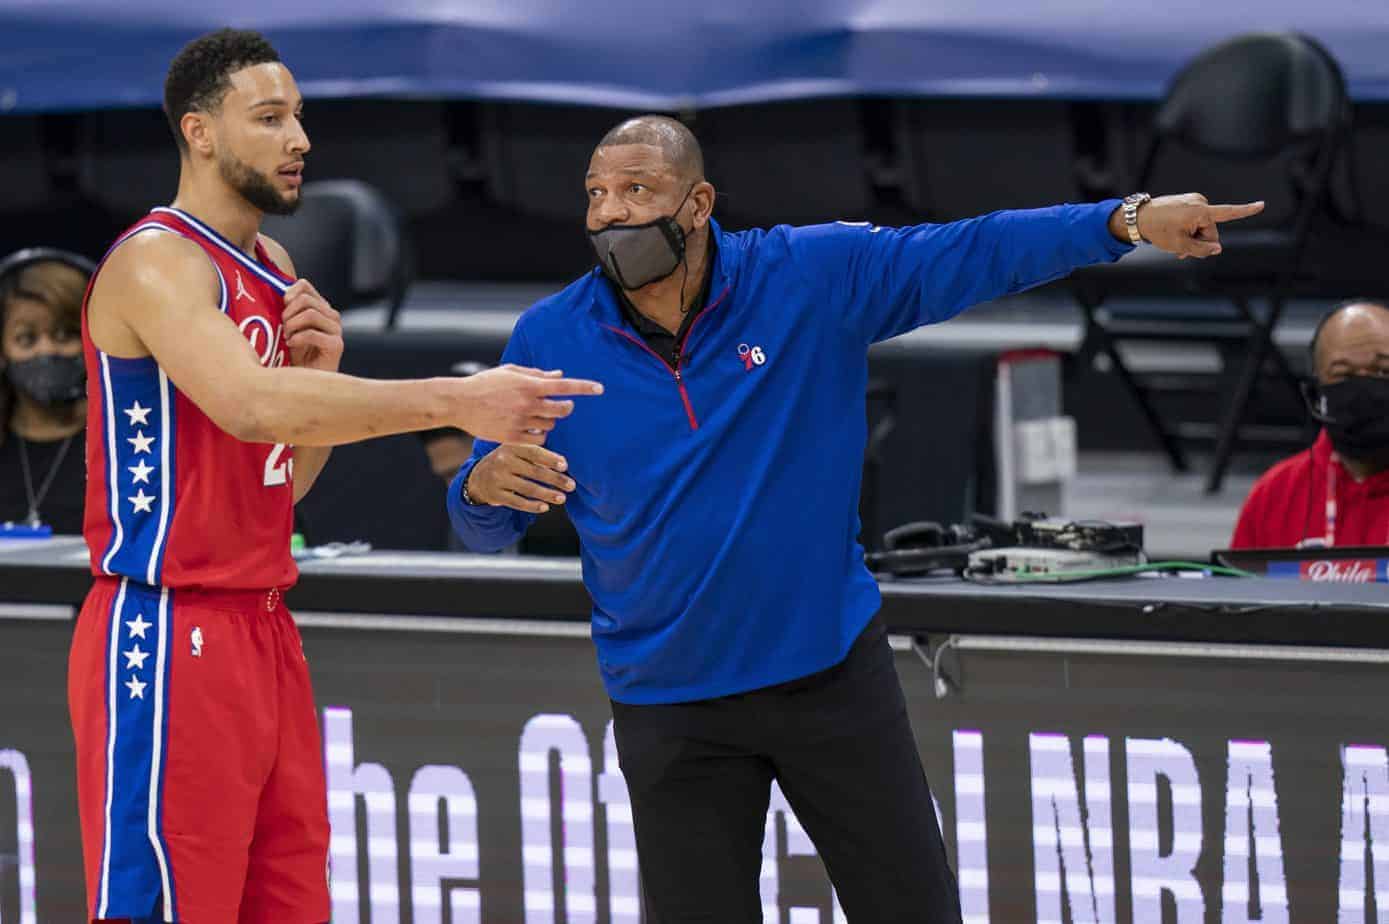 During an appearance on "First Take", Doc Rivers said that he would love for Ben Simmons to return to the team despite the reports, thinks he can win with him